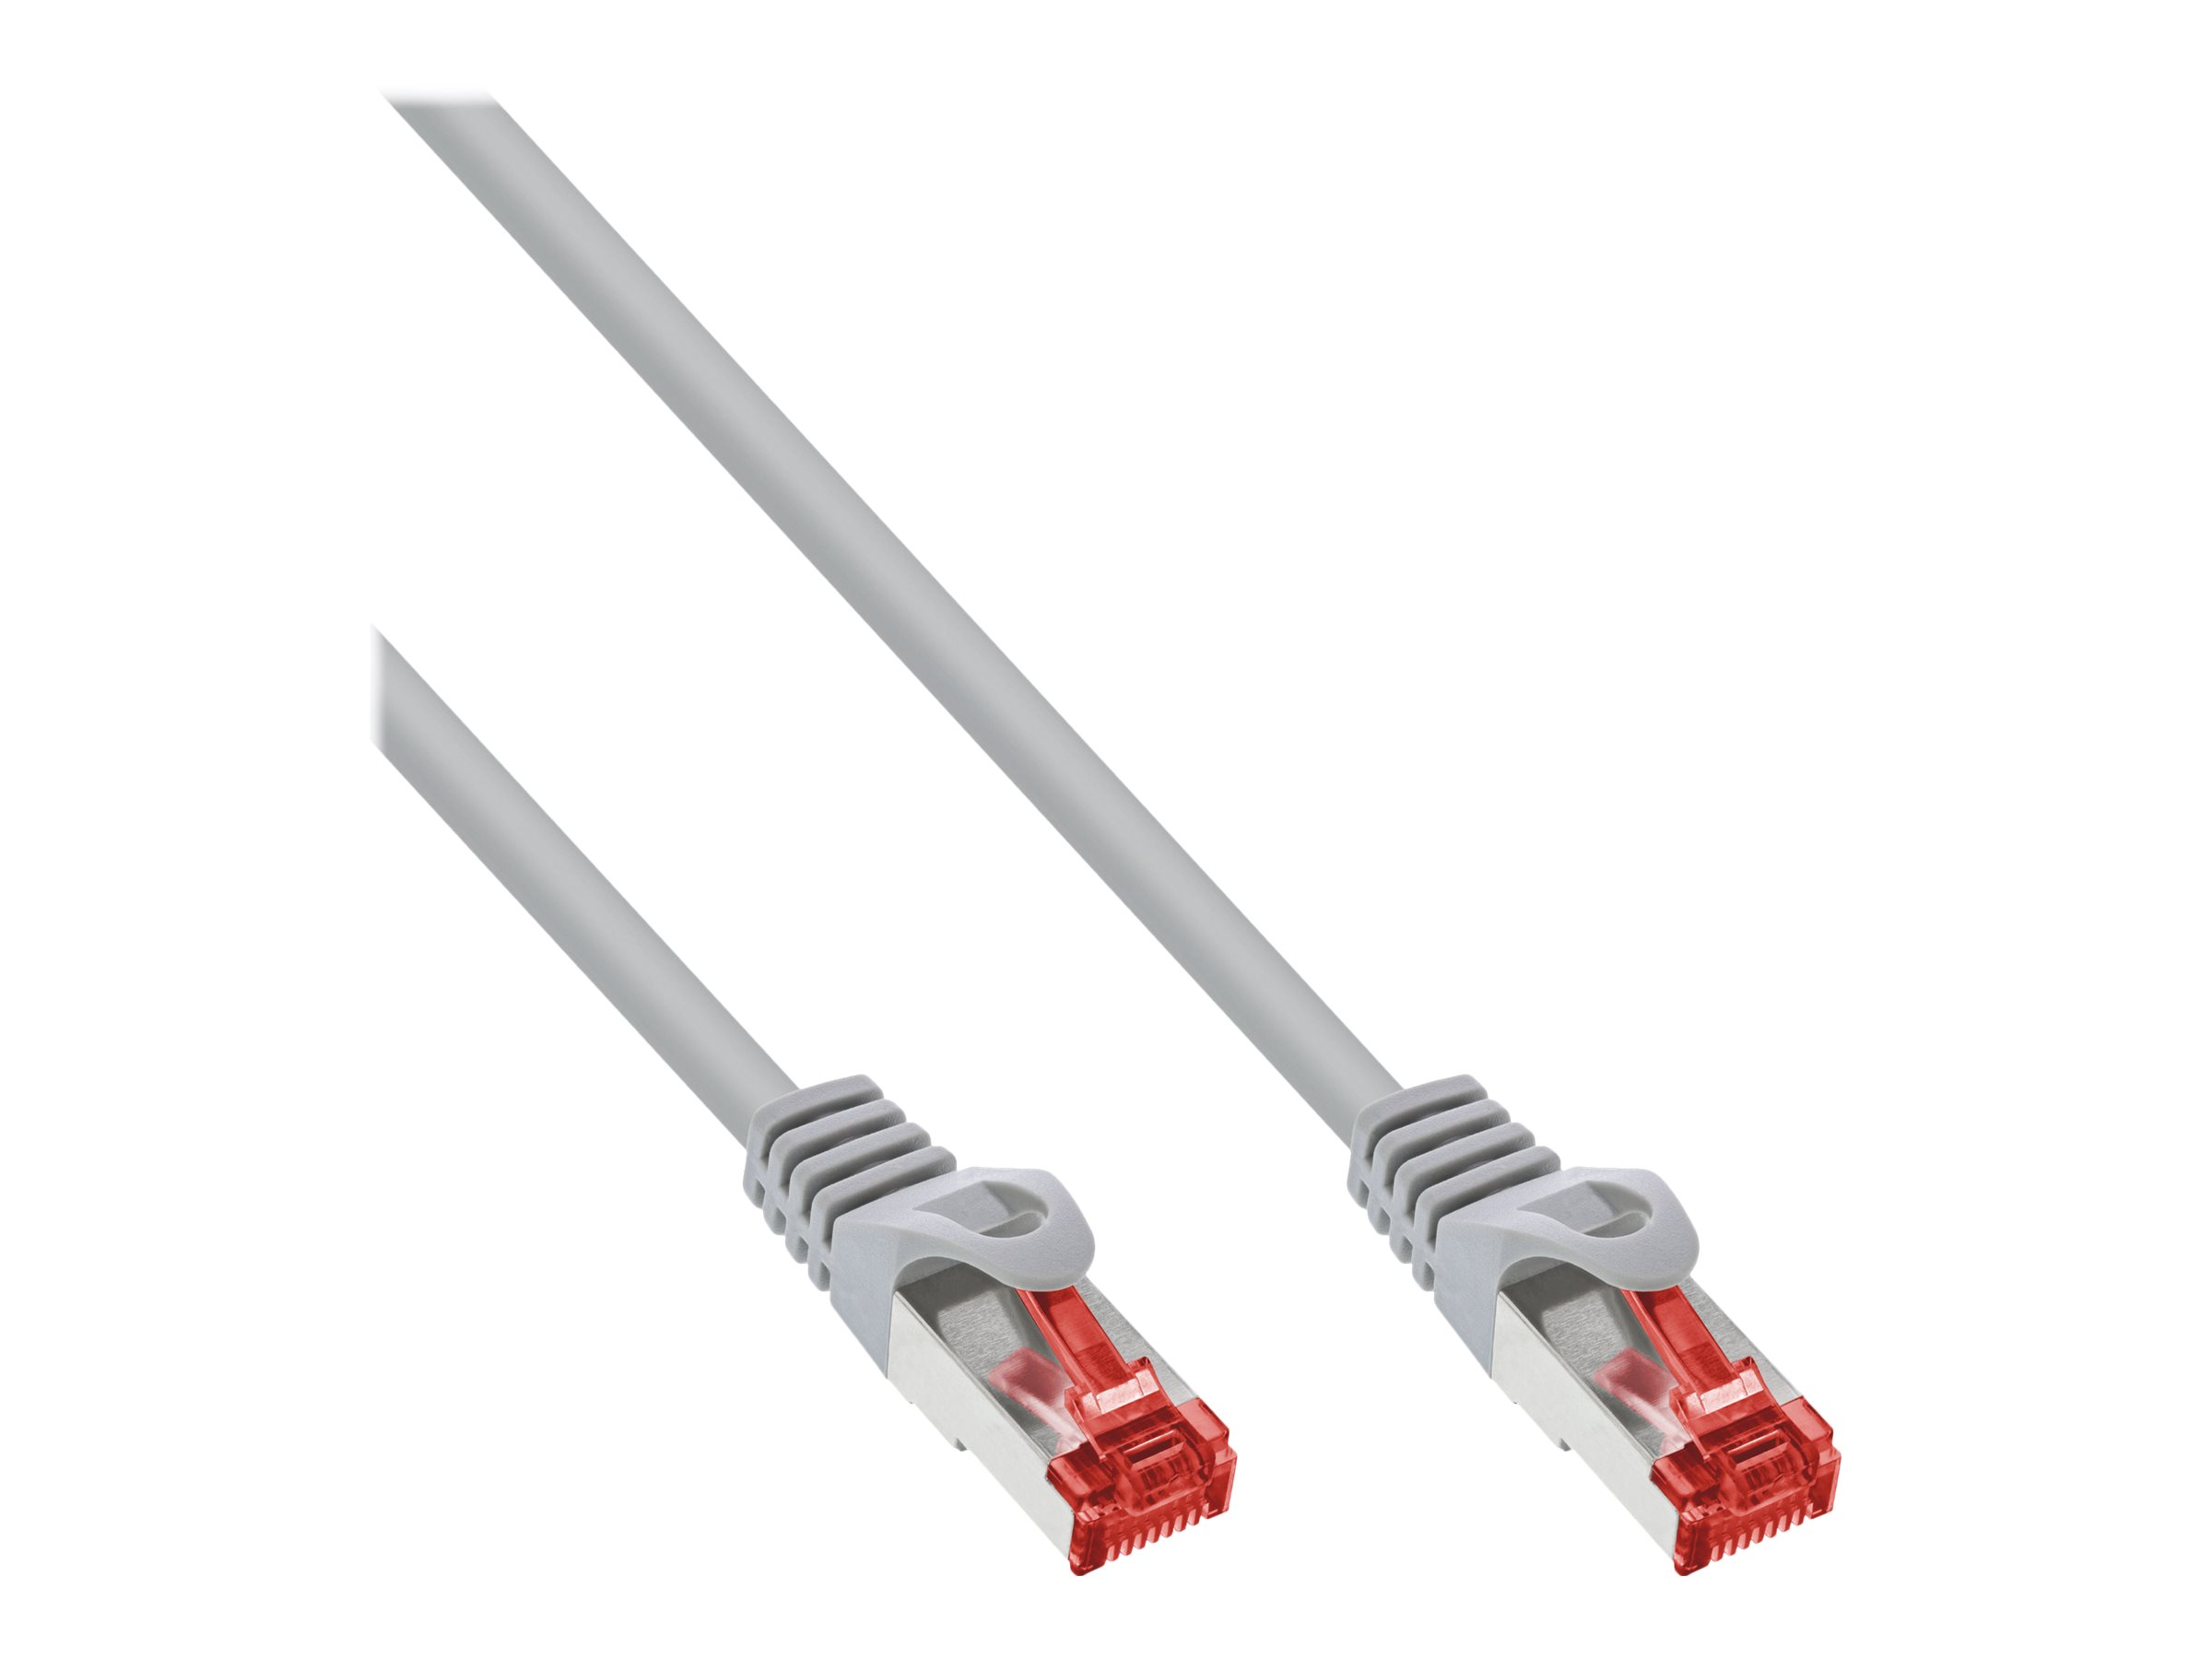 AG Cheap shop & online cables in IT the OCTO adapters